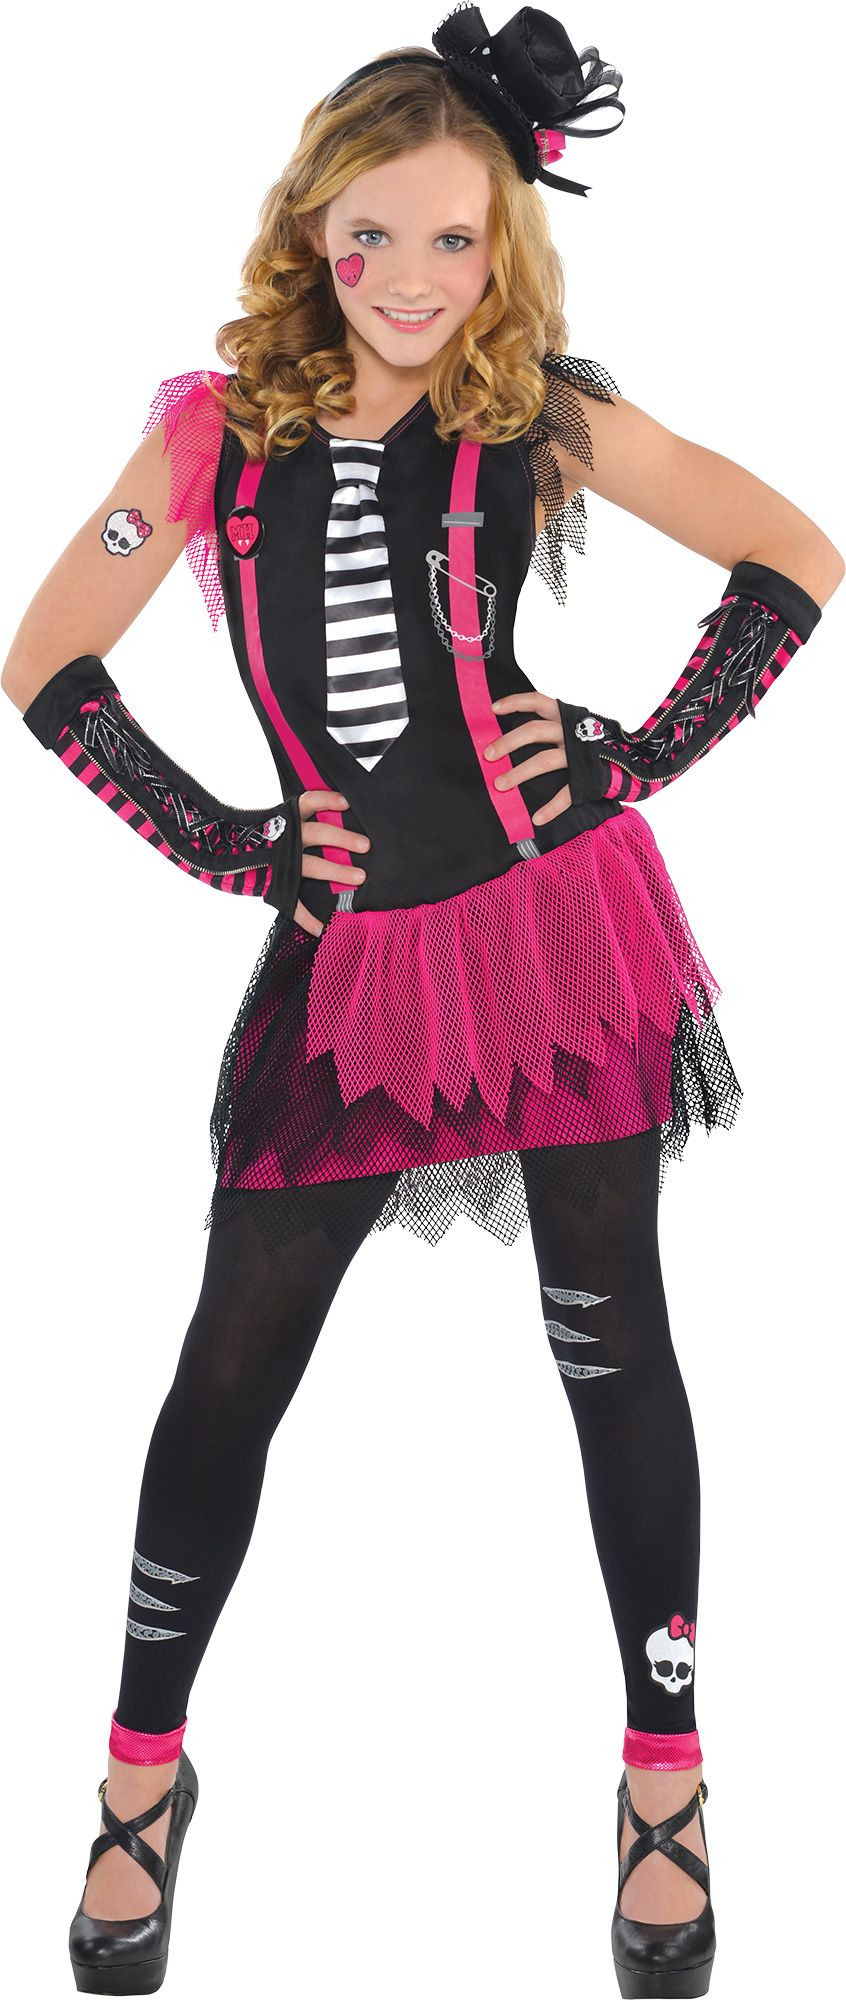 The 23 Best Ideas for Halloween Costumes for Girls Party City Home